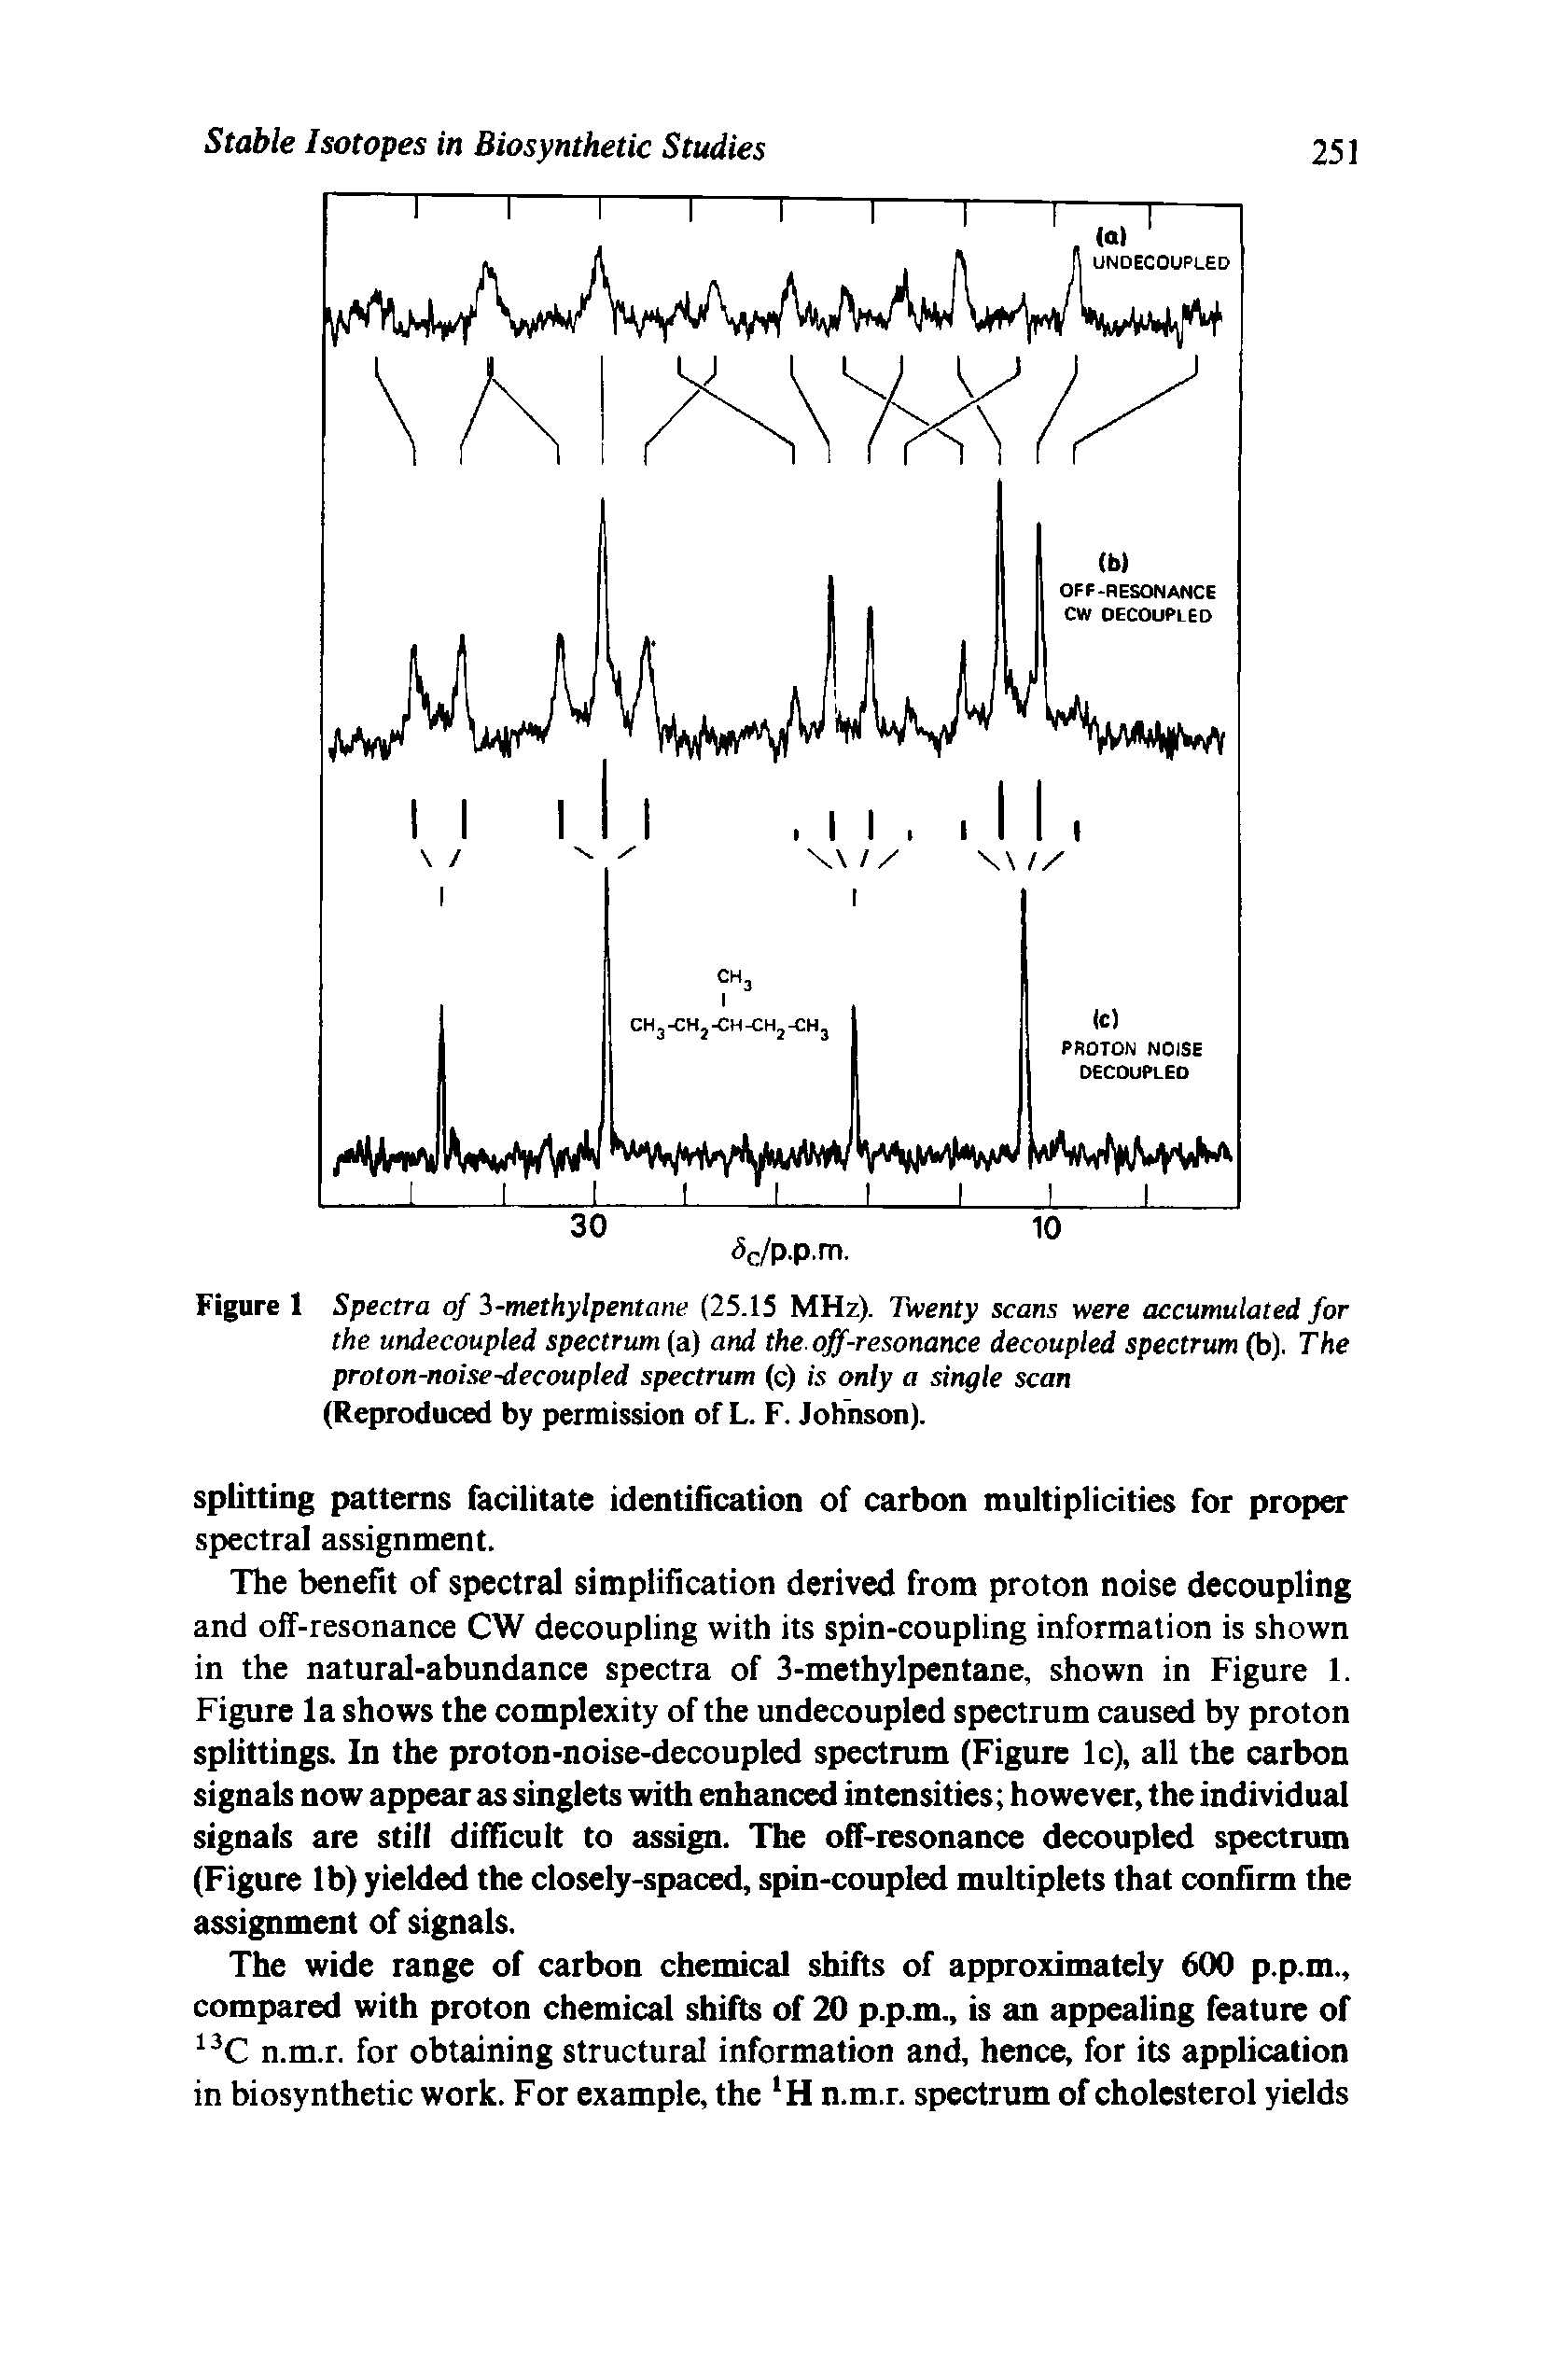 Figure I Spectra of i-methylpentaiw (25.15 MHz). Twenty scans were accumulated for the undecoupled spectrum (a) and the.off-resonance decoupled spectrum (b). The proton-noise-decoupled spectrum (c) is only a single scan (Reproduced by permission of L. F. Johnson).